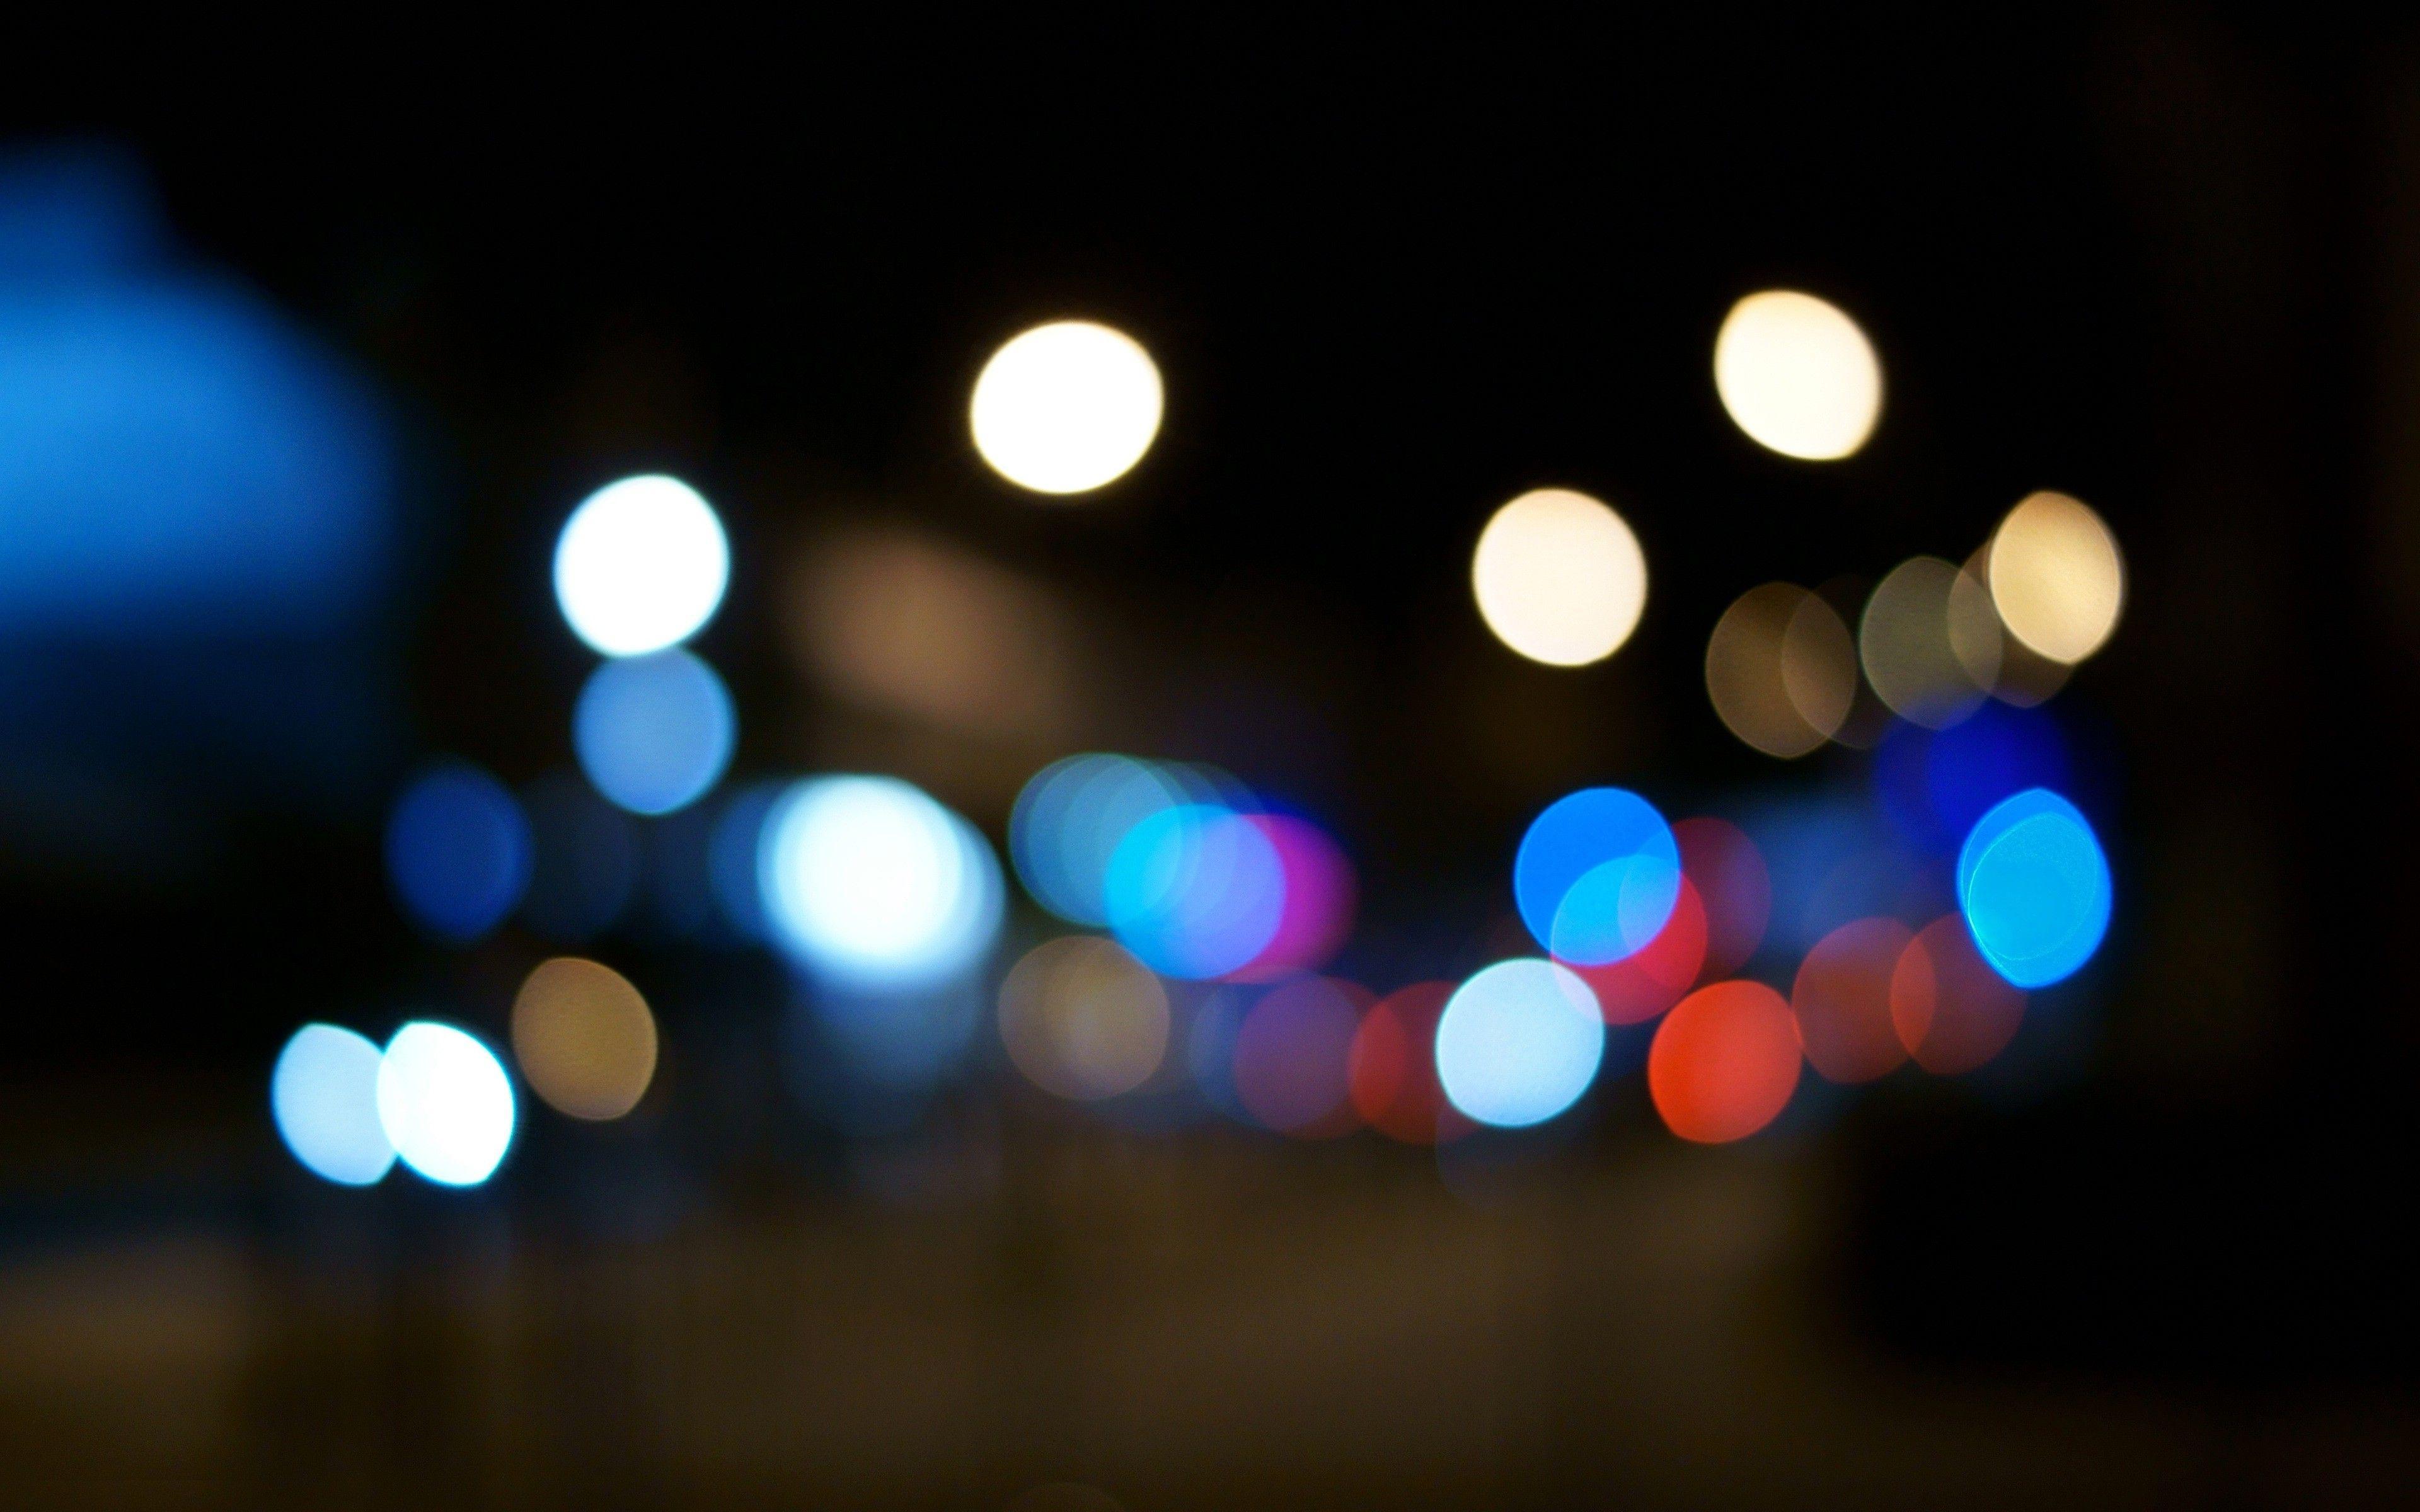 City light bulbs out of focus Wallpaper HD / Desktop and Mobile